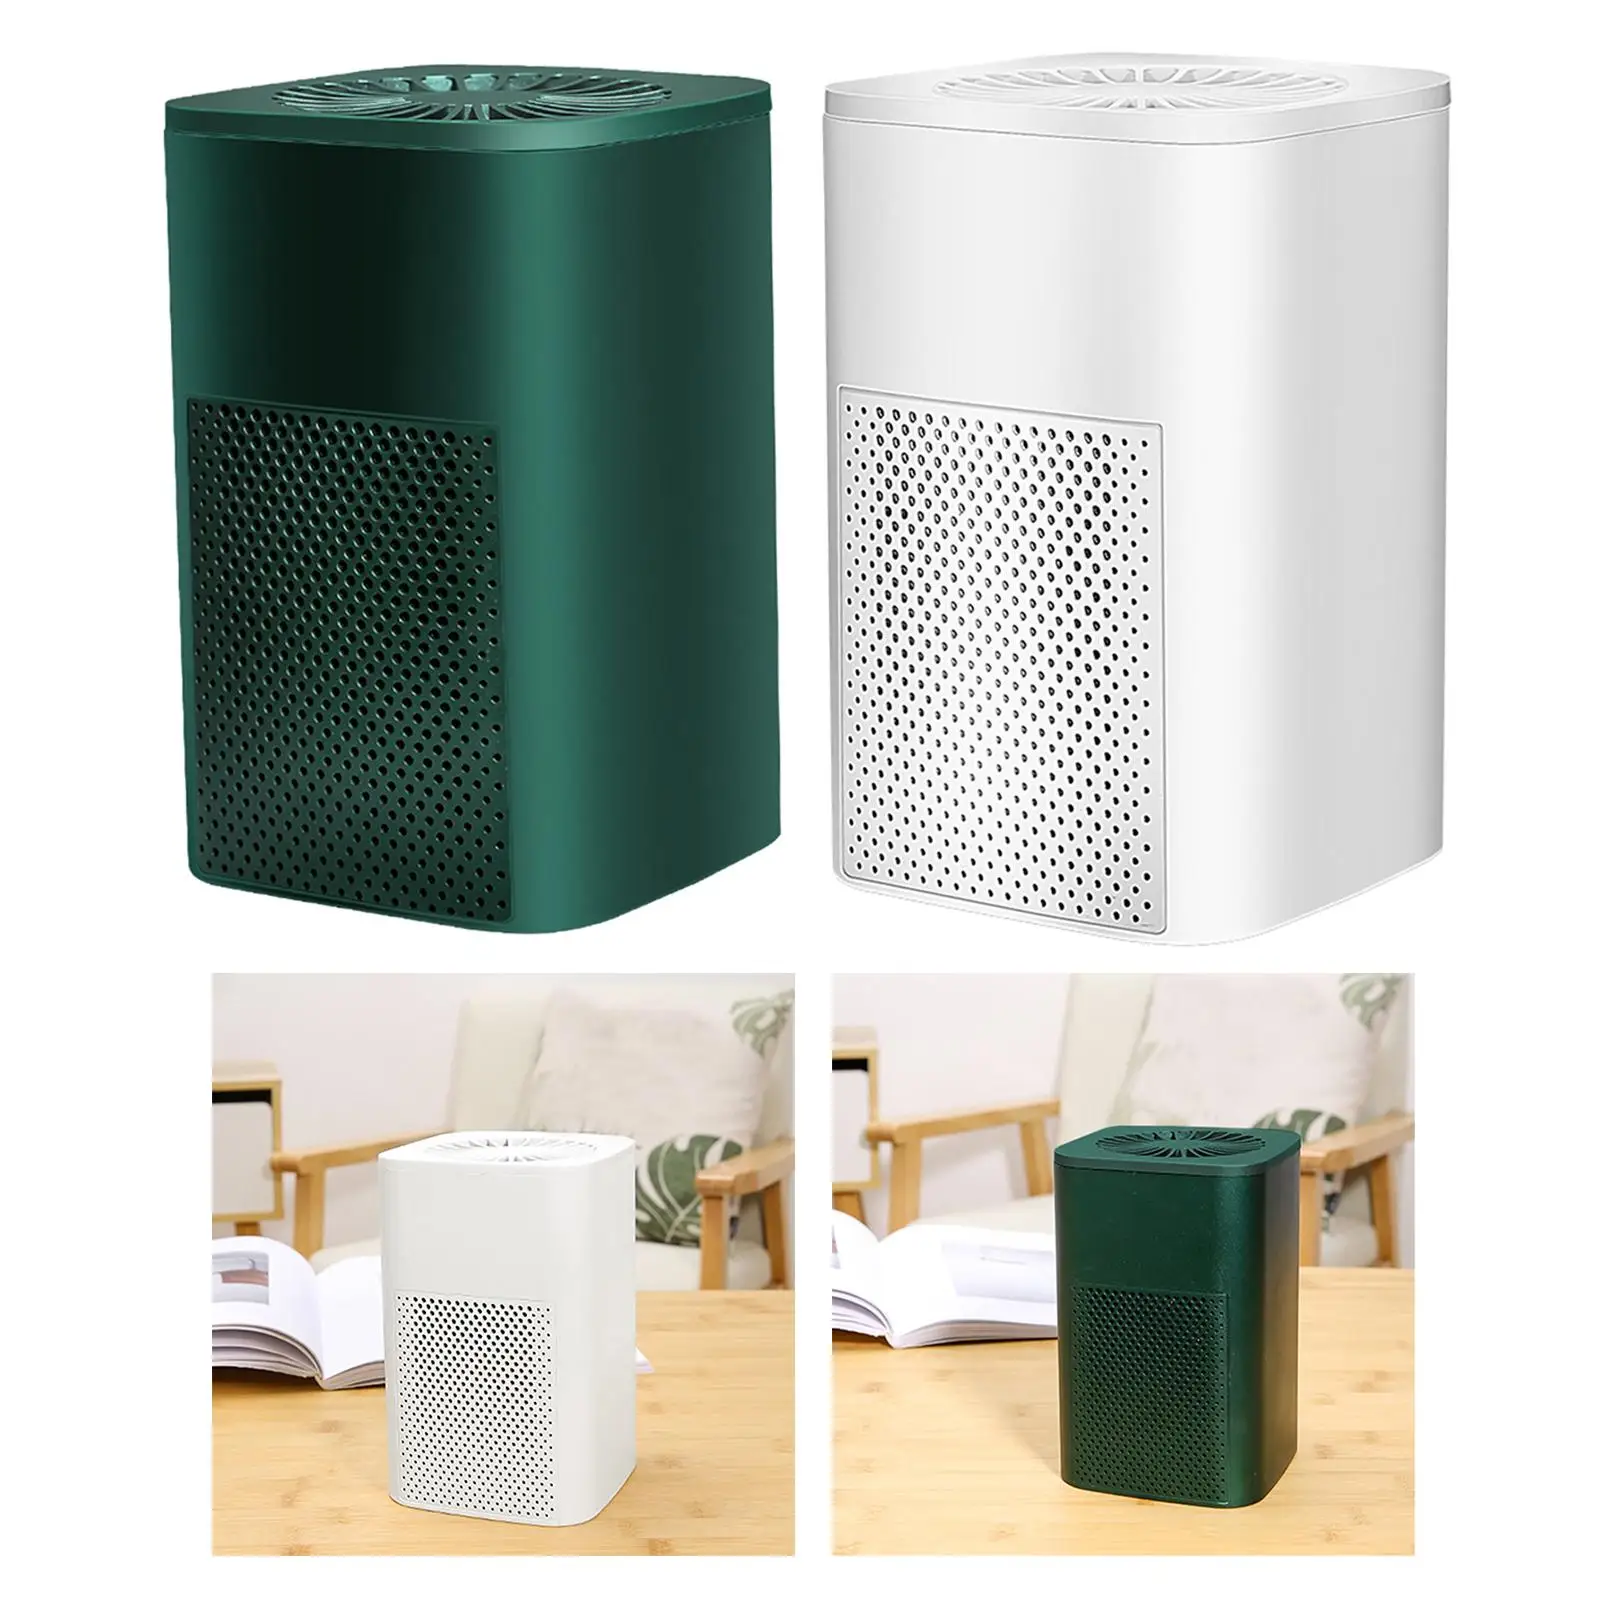 Mini Air Purifier Travel Car Activated Carbon Office PM2.5 Monitor Removes Pollen CO2